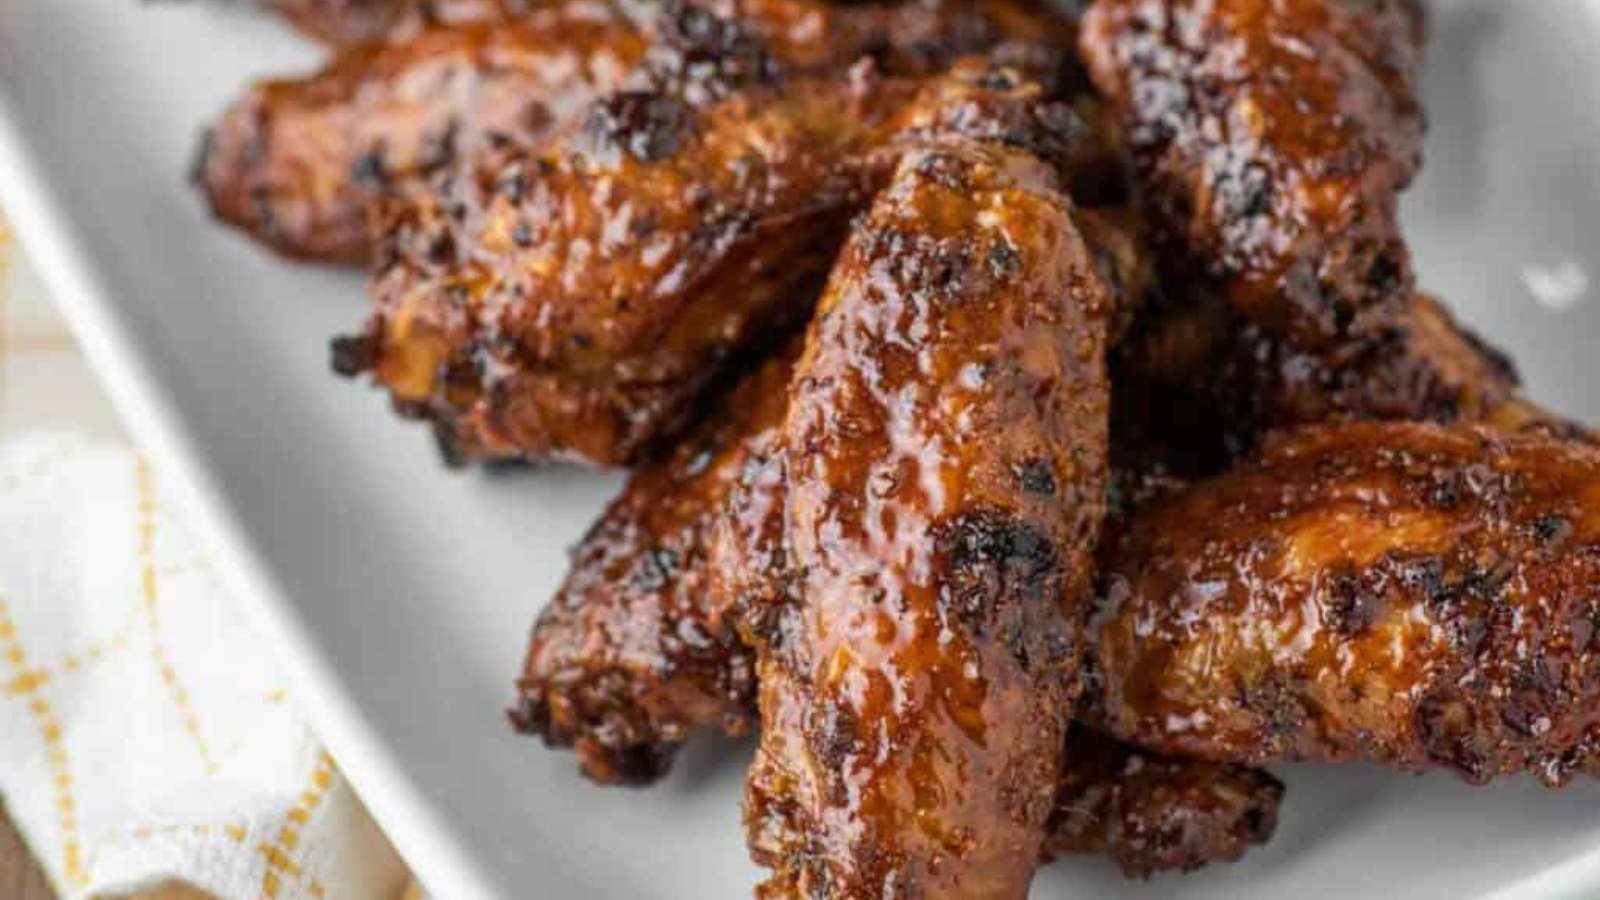 BBQ chicken wings on a white plate.